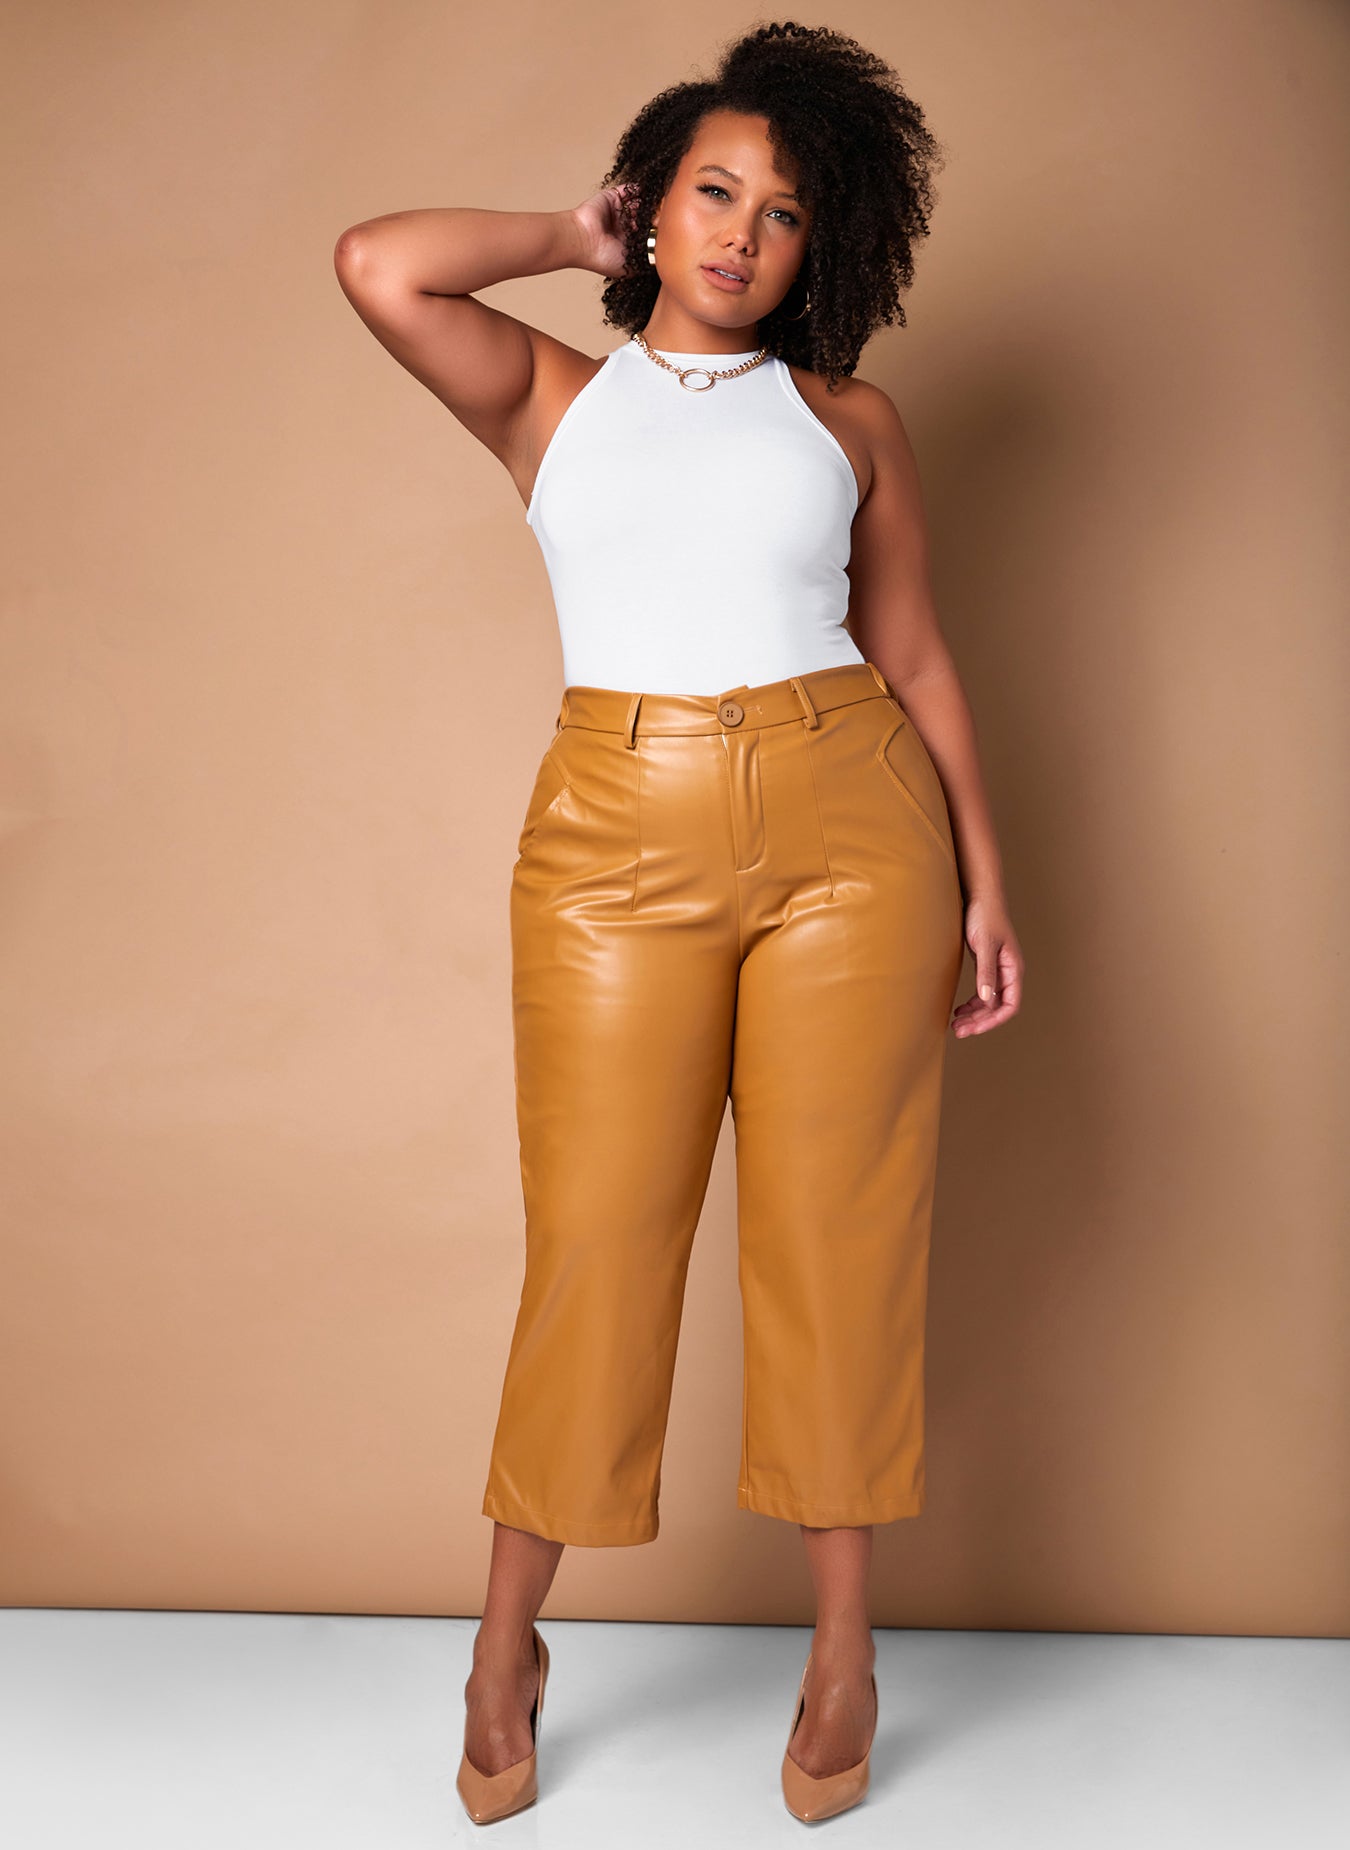 Than The Other Vegan Leather Pants Camel REBDOLLS